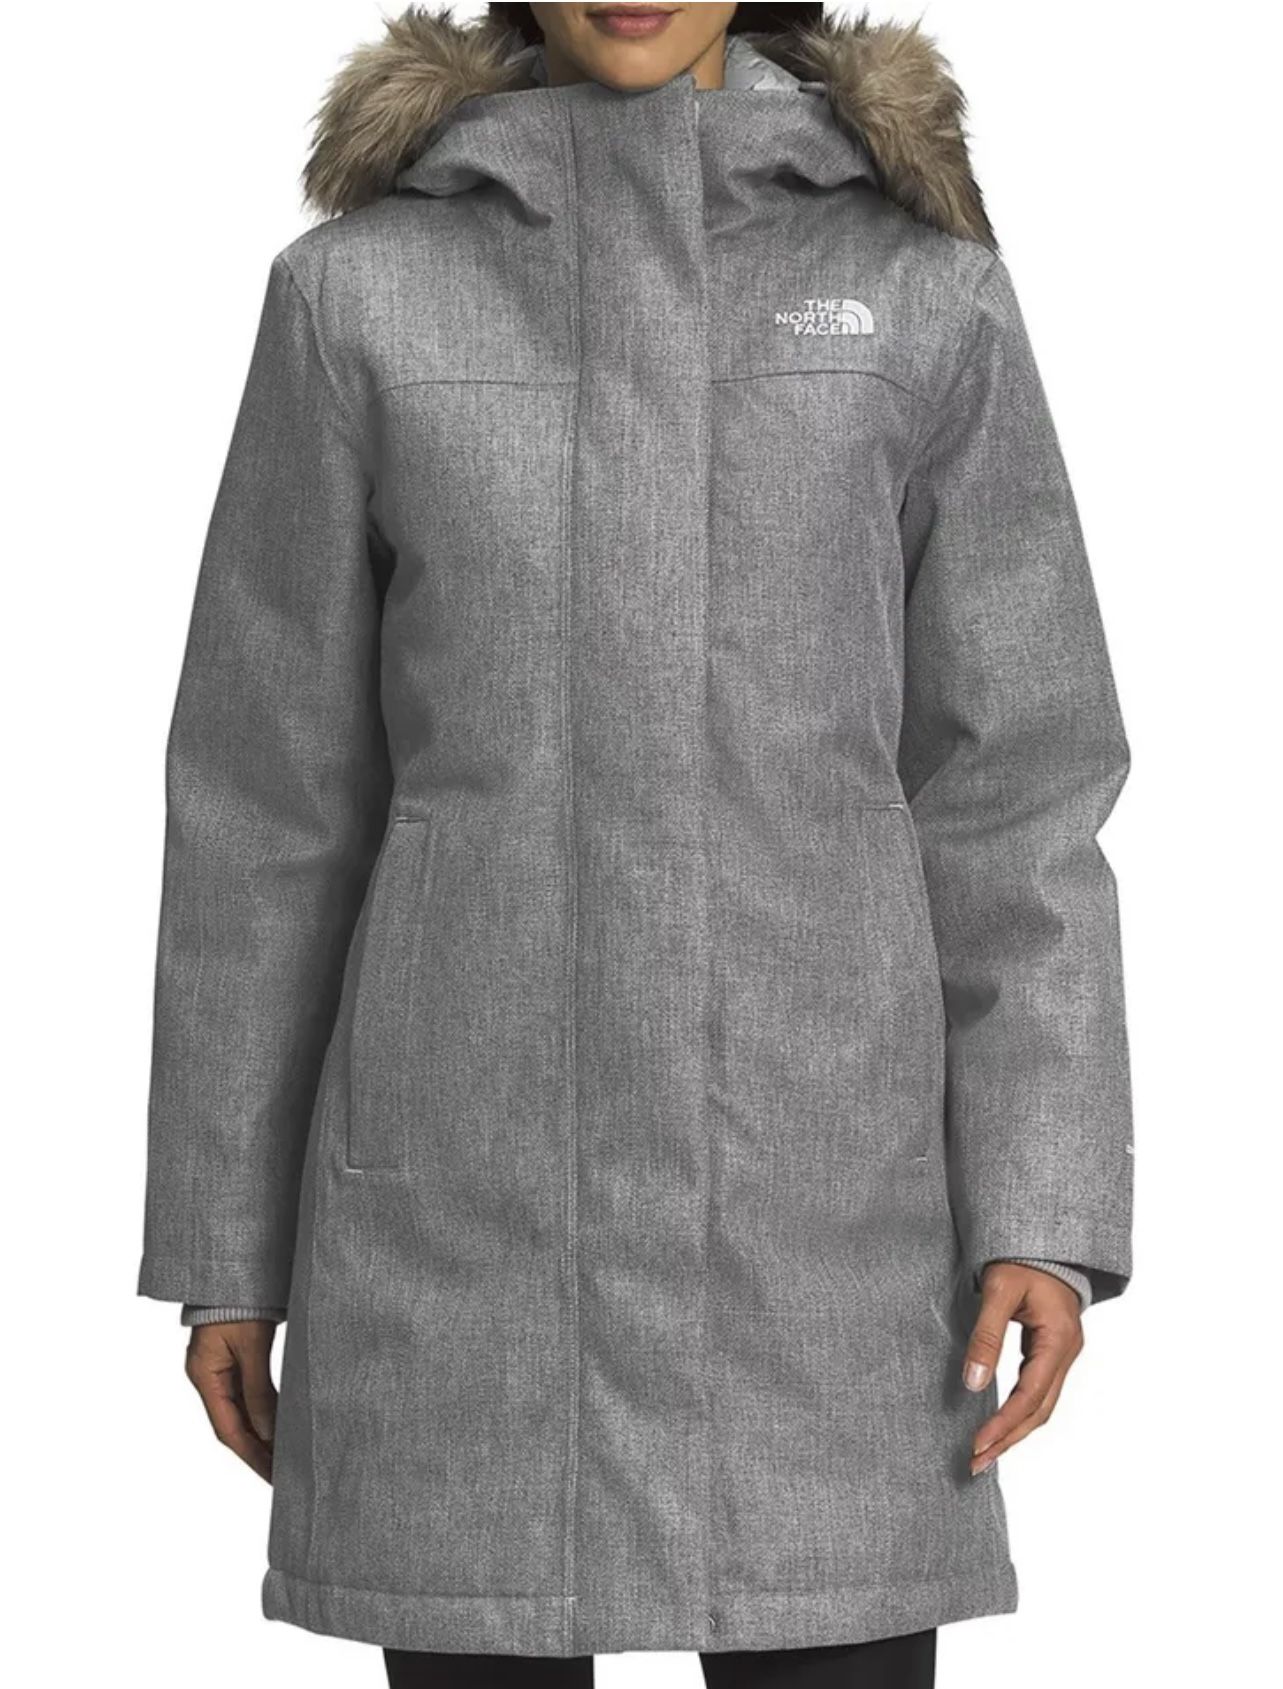 The North Face Women’s Novelty Arctic Down Parka Size S